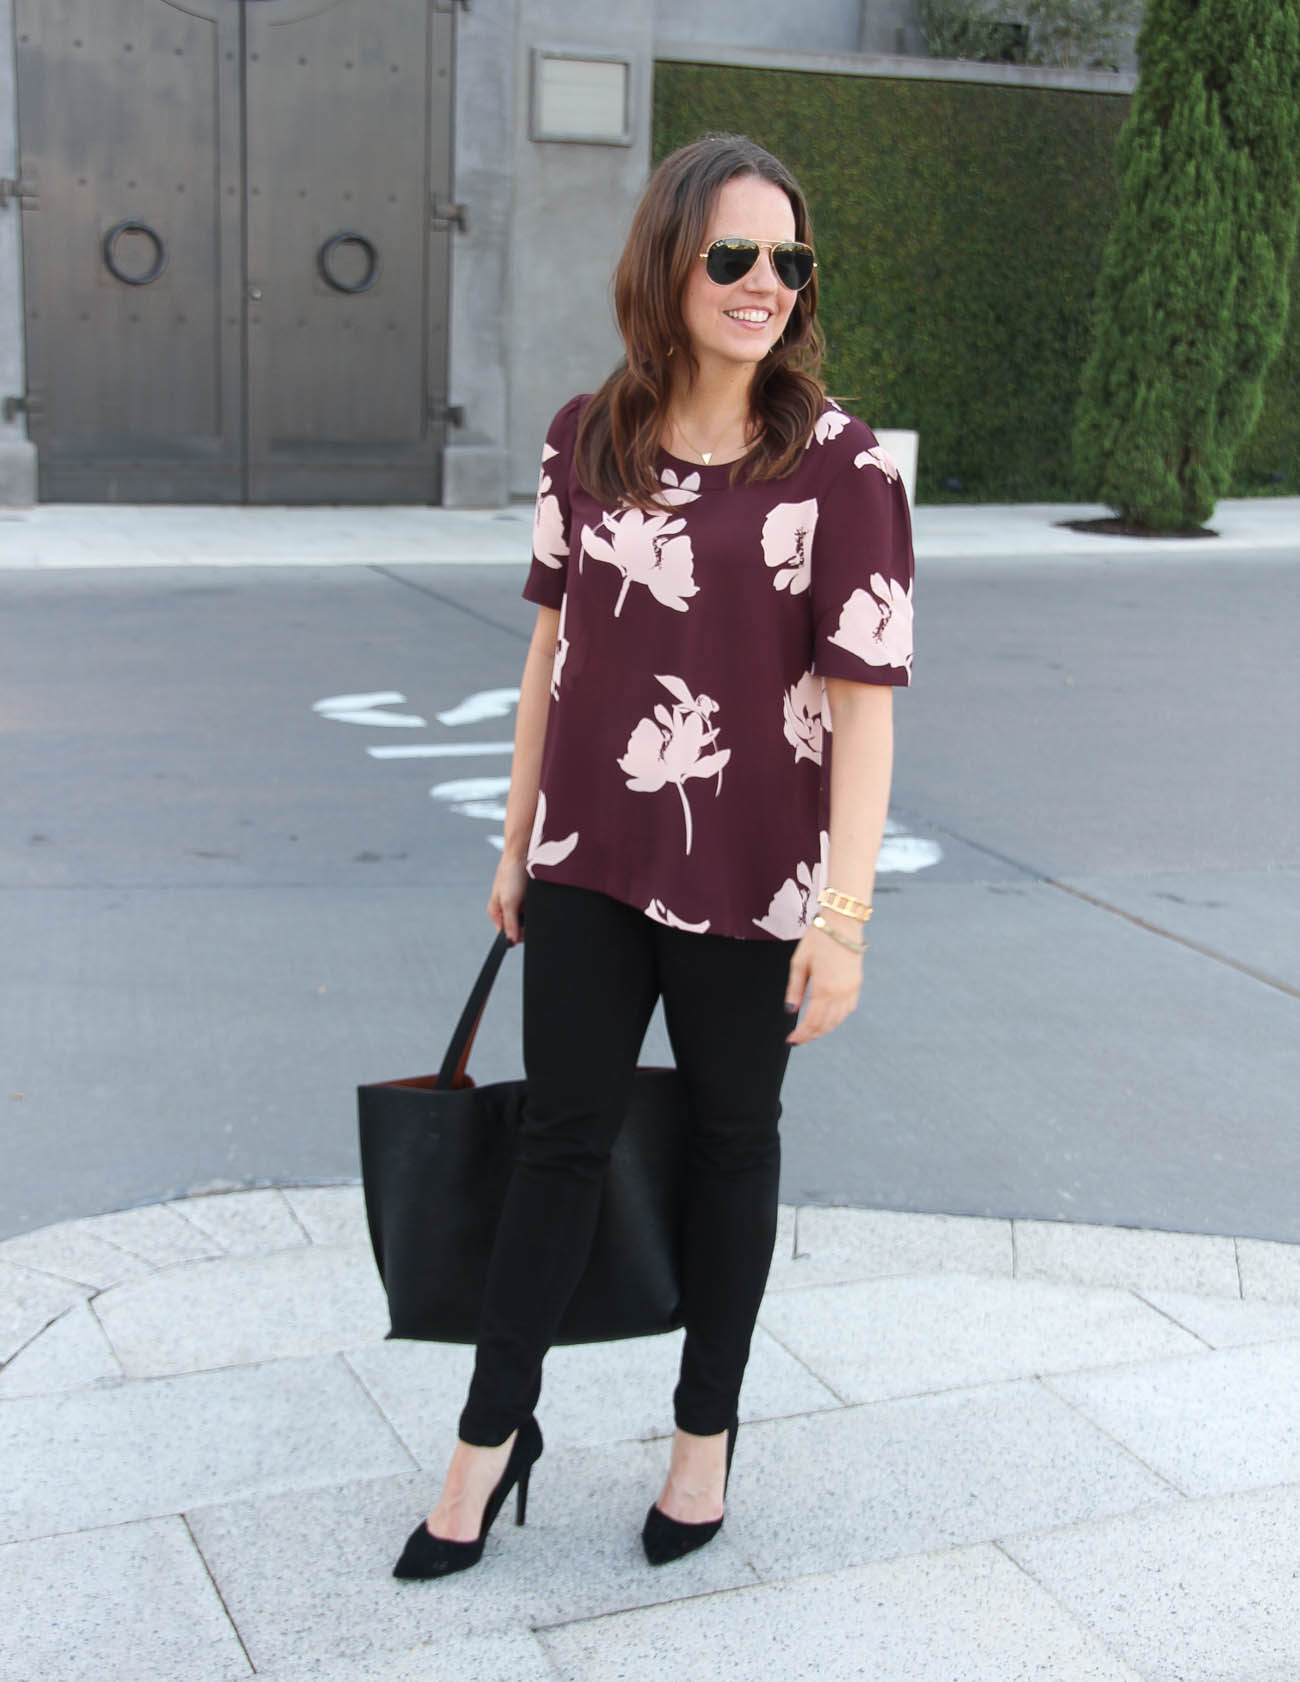 Burgundy Floral Blouse for Work & Play | Lady in Violet | Houston Blogger  |Lady in Violet